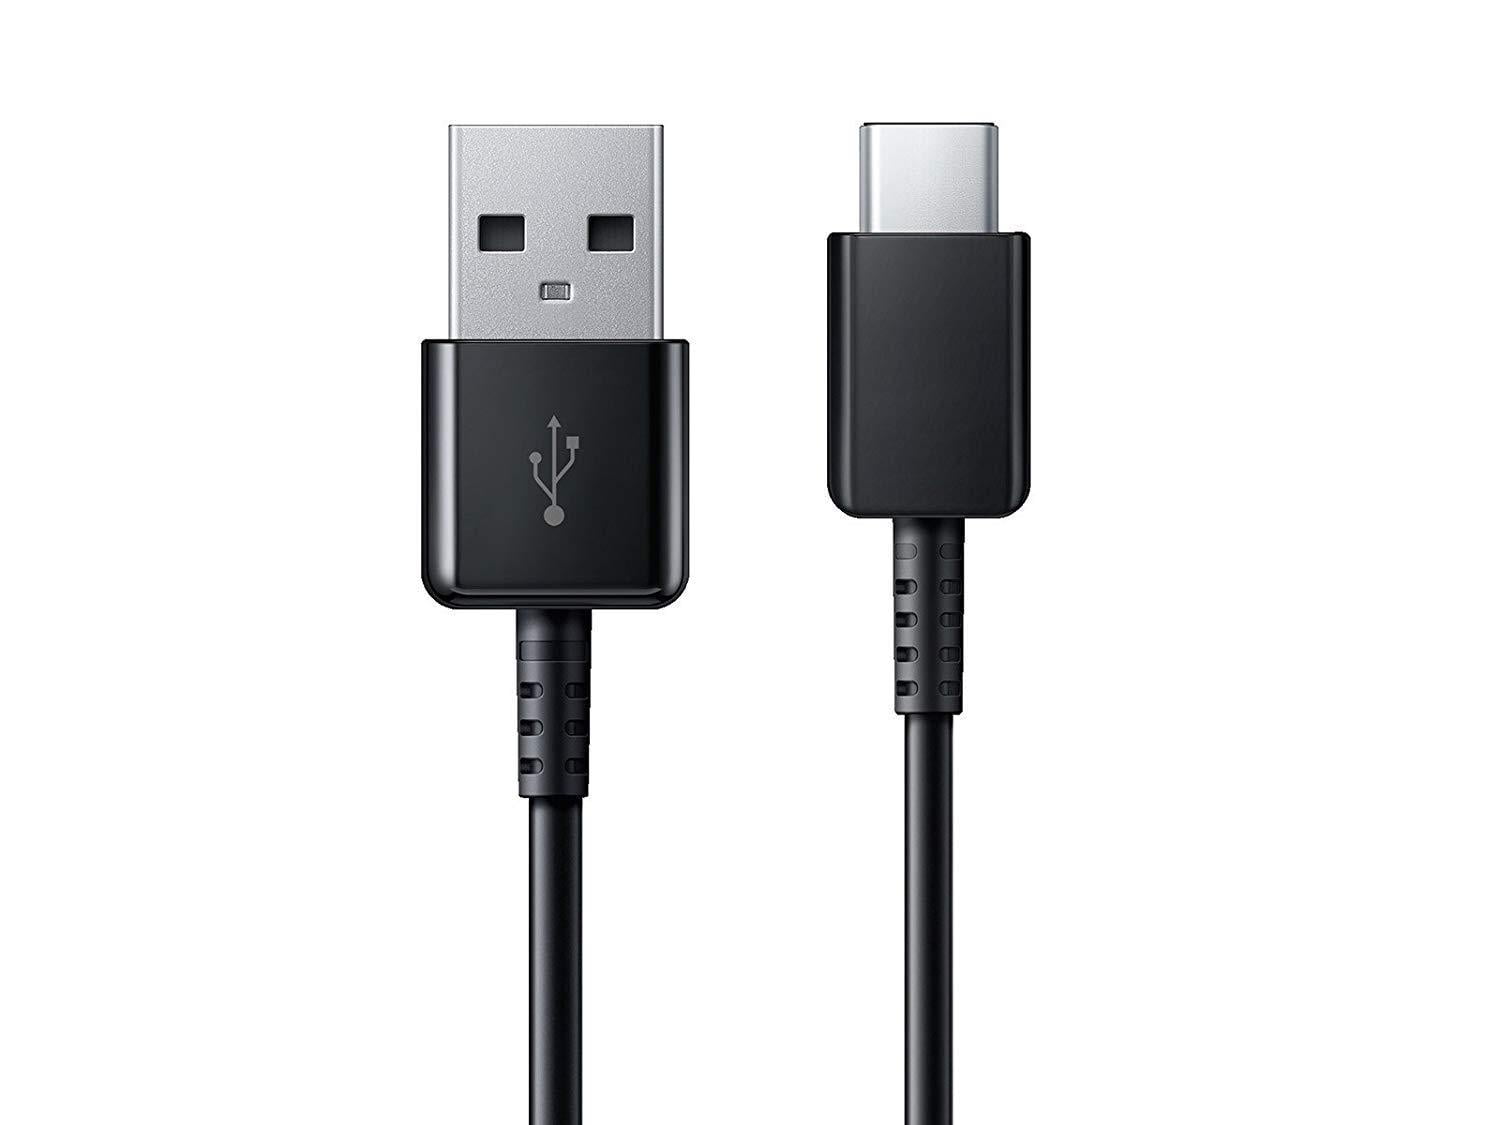 skrive kedel Ombord Authentic Samsung Galaxy S8 USB to Type-C Charging and Transfer Cable.  (Black / 4ft) (Bulk Packaging) - Walmart.com